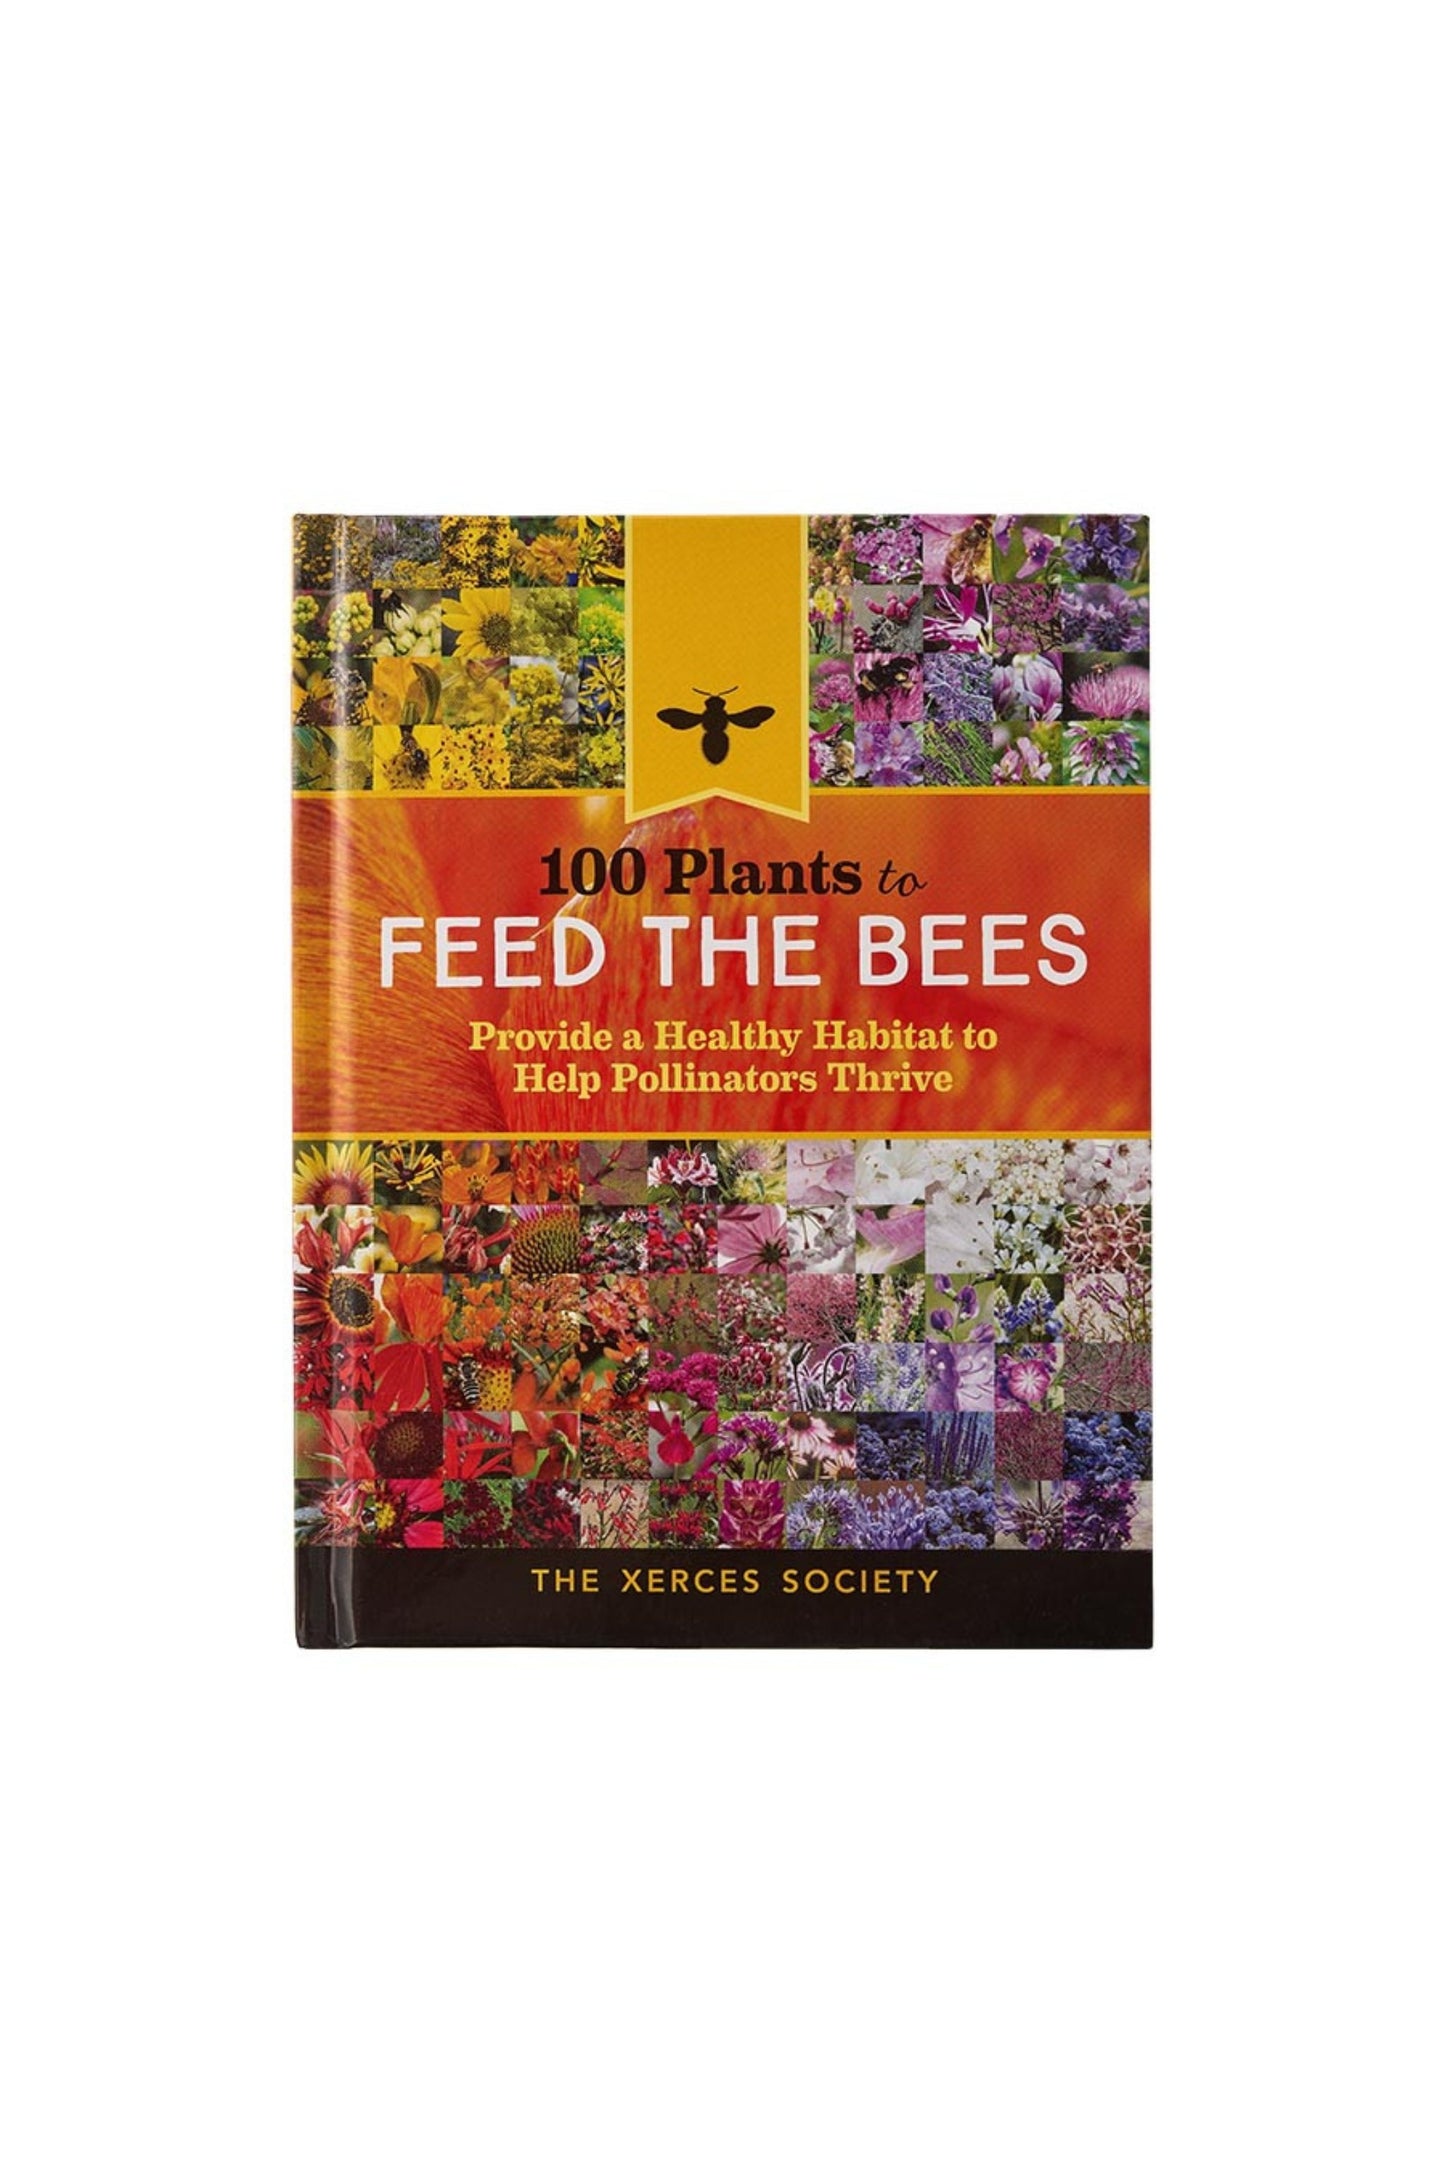 100 Pants to Feed The Bees Providing a Healthy Habitat to Help Pollinators Thrive studio image